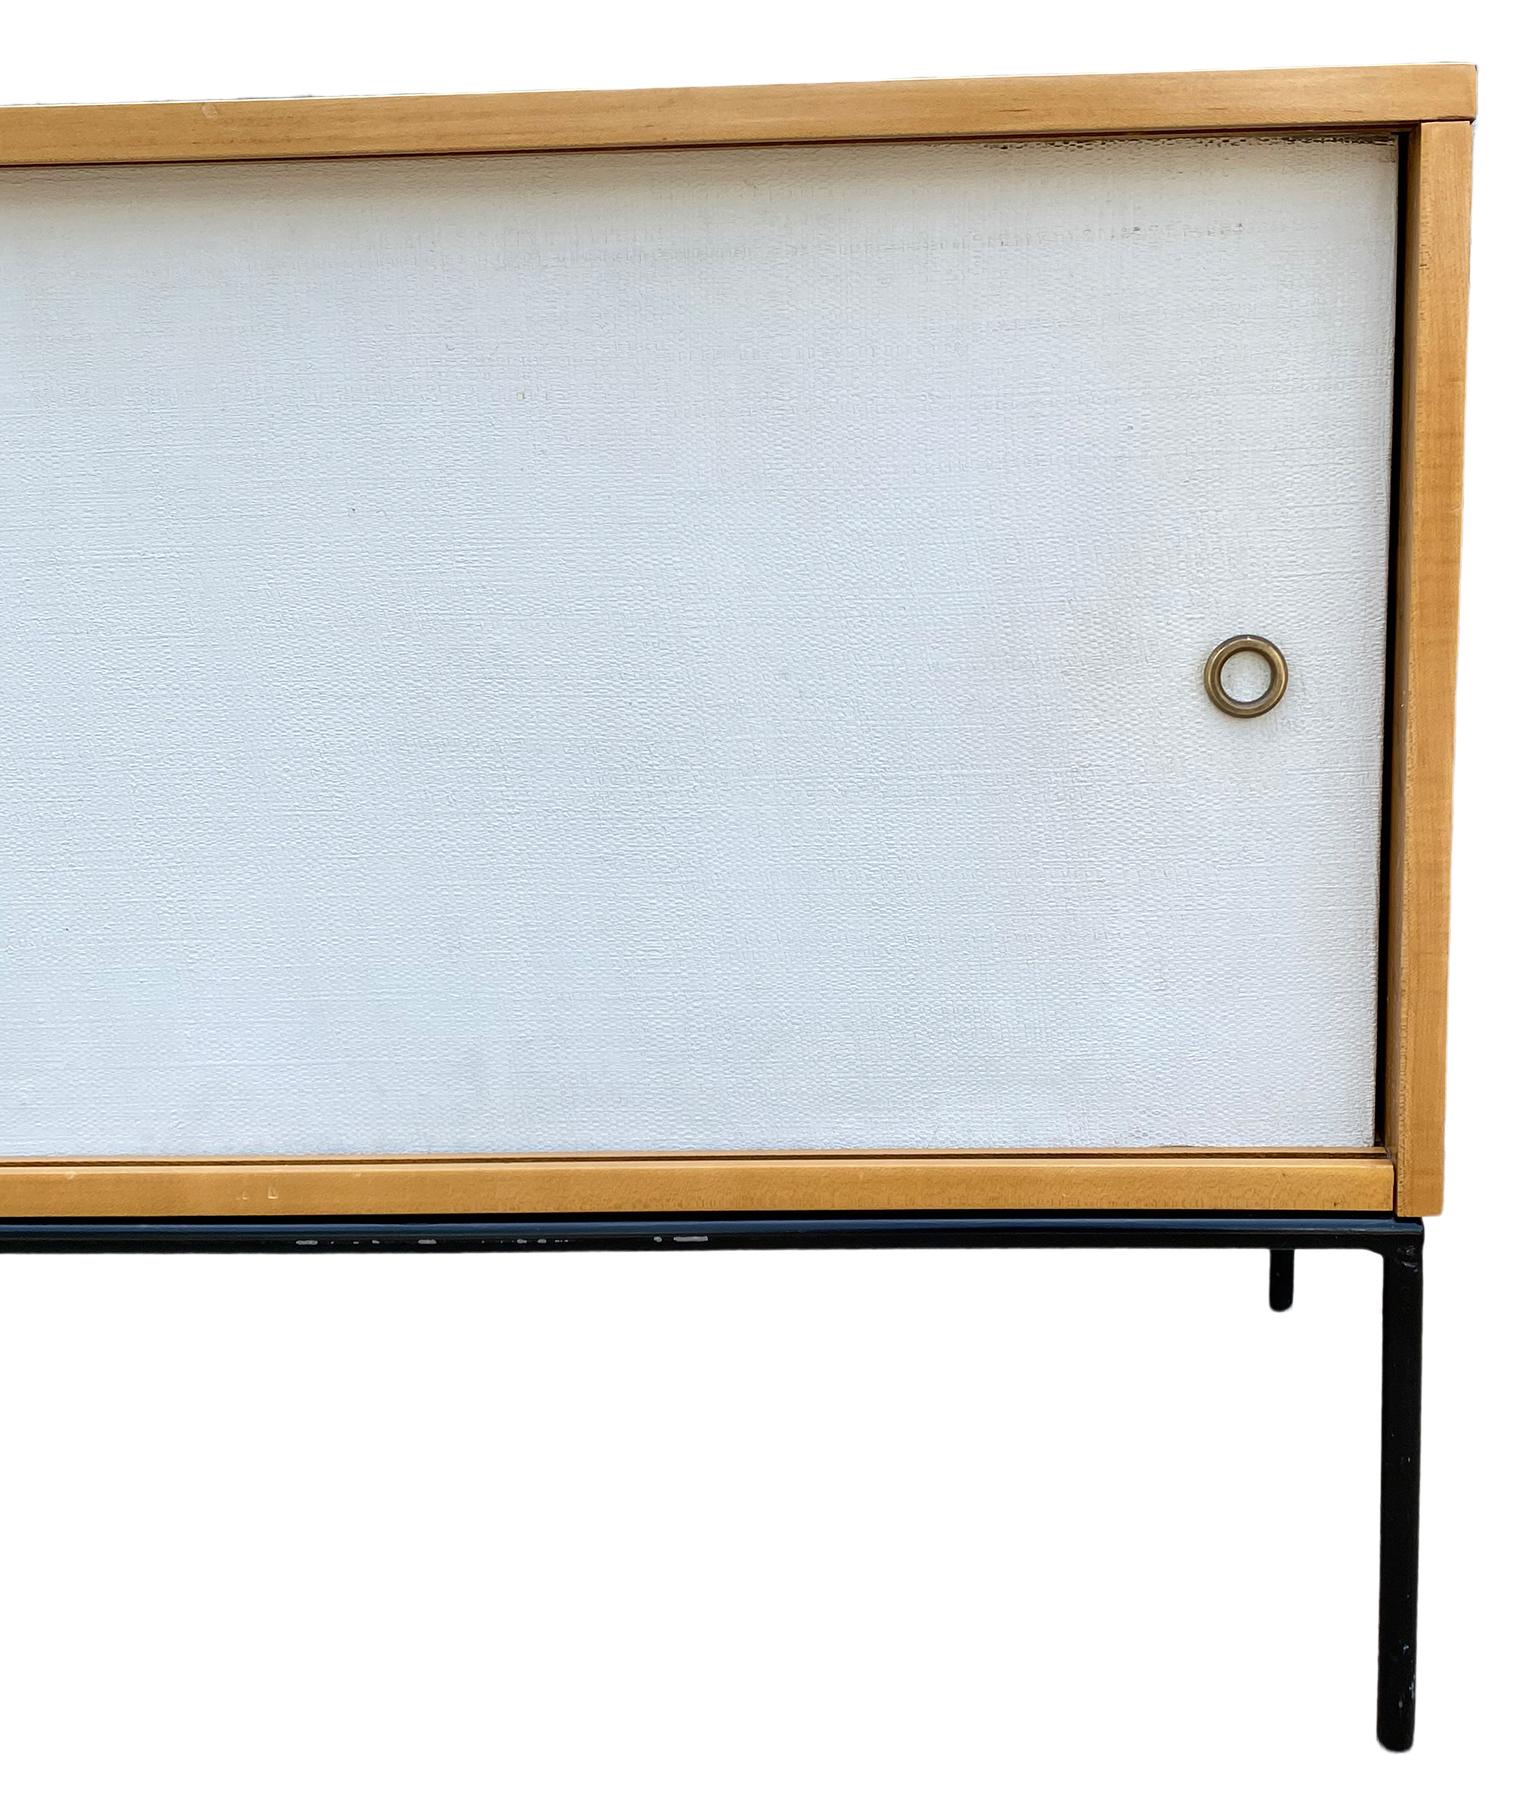 20th Century Midcentury Credenza by Paul McCobb Planner Group #1513 White Doors Iron